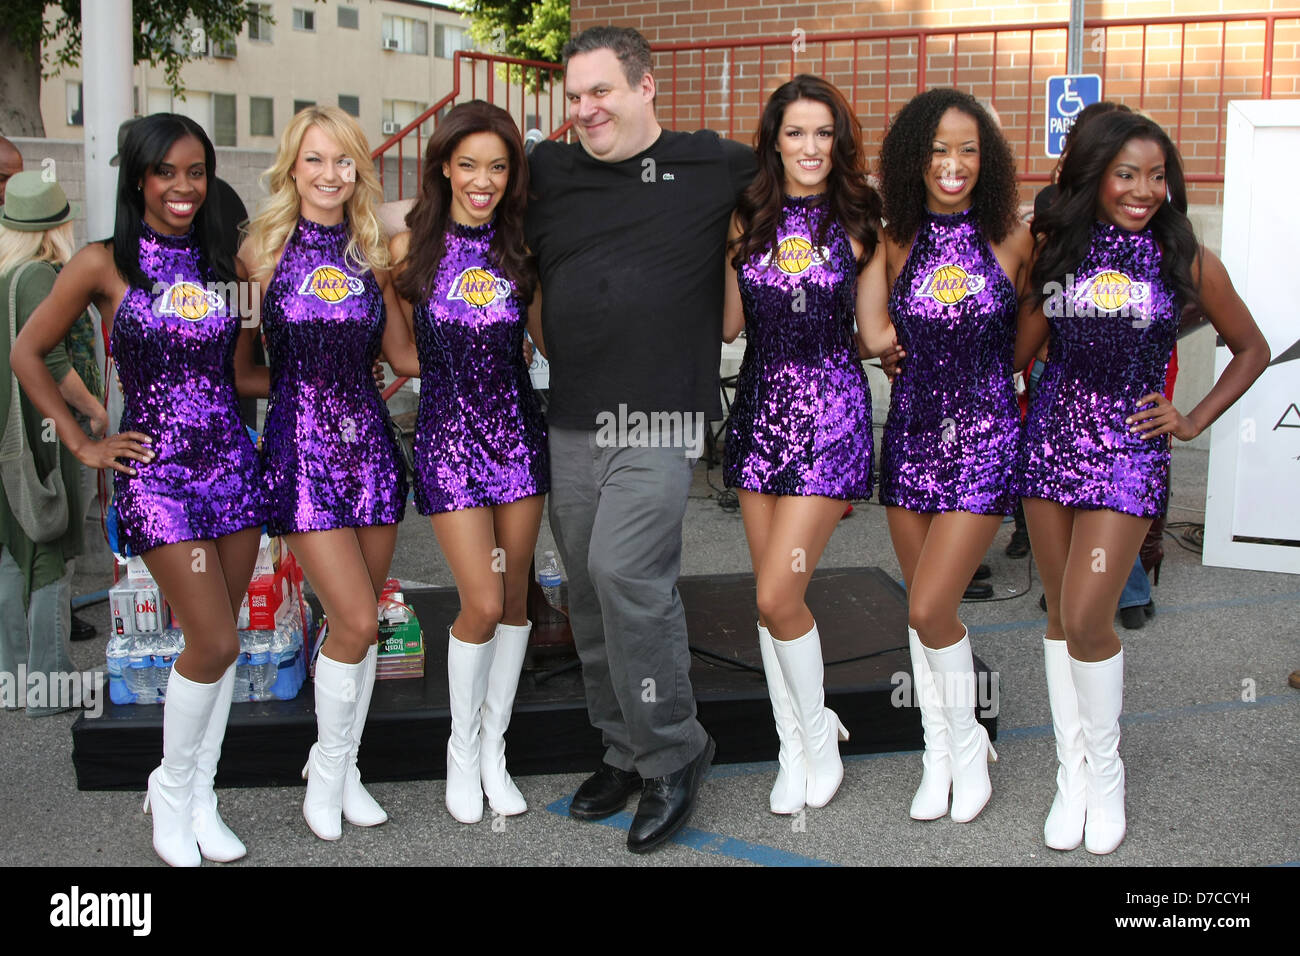 Jeff Garlin and the Laker Girls Chamber Of Commerce 17th Annual Police And Fire BBQ held at the Hollywood LAPD and Fire Stock Photo